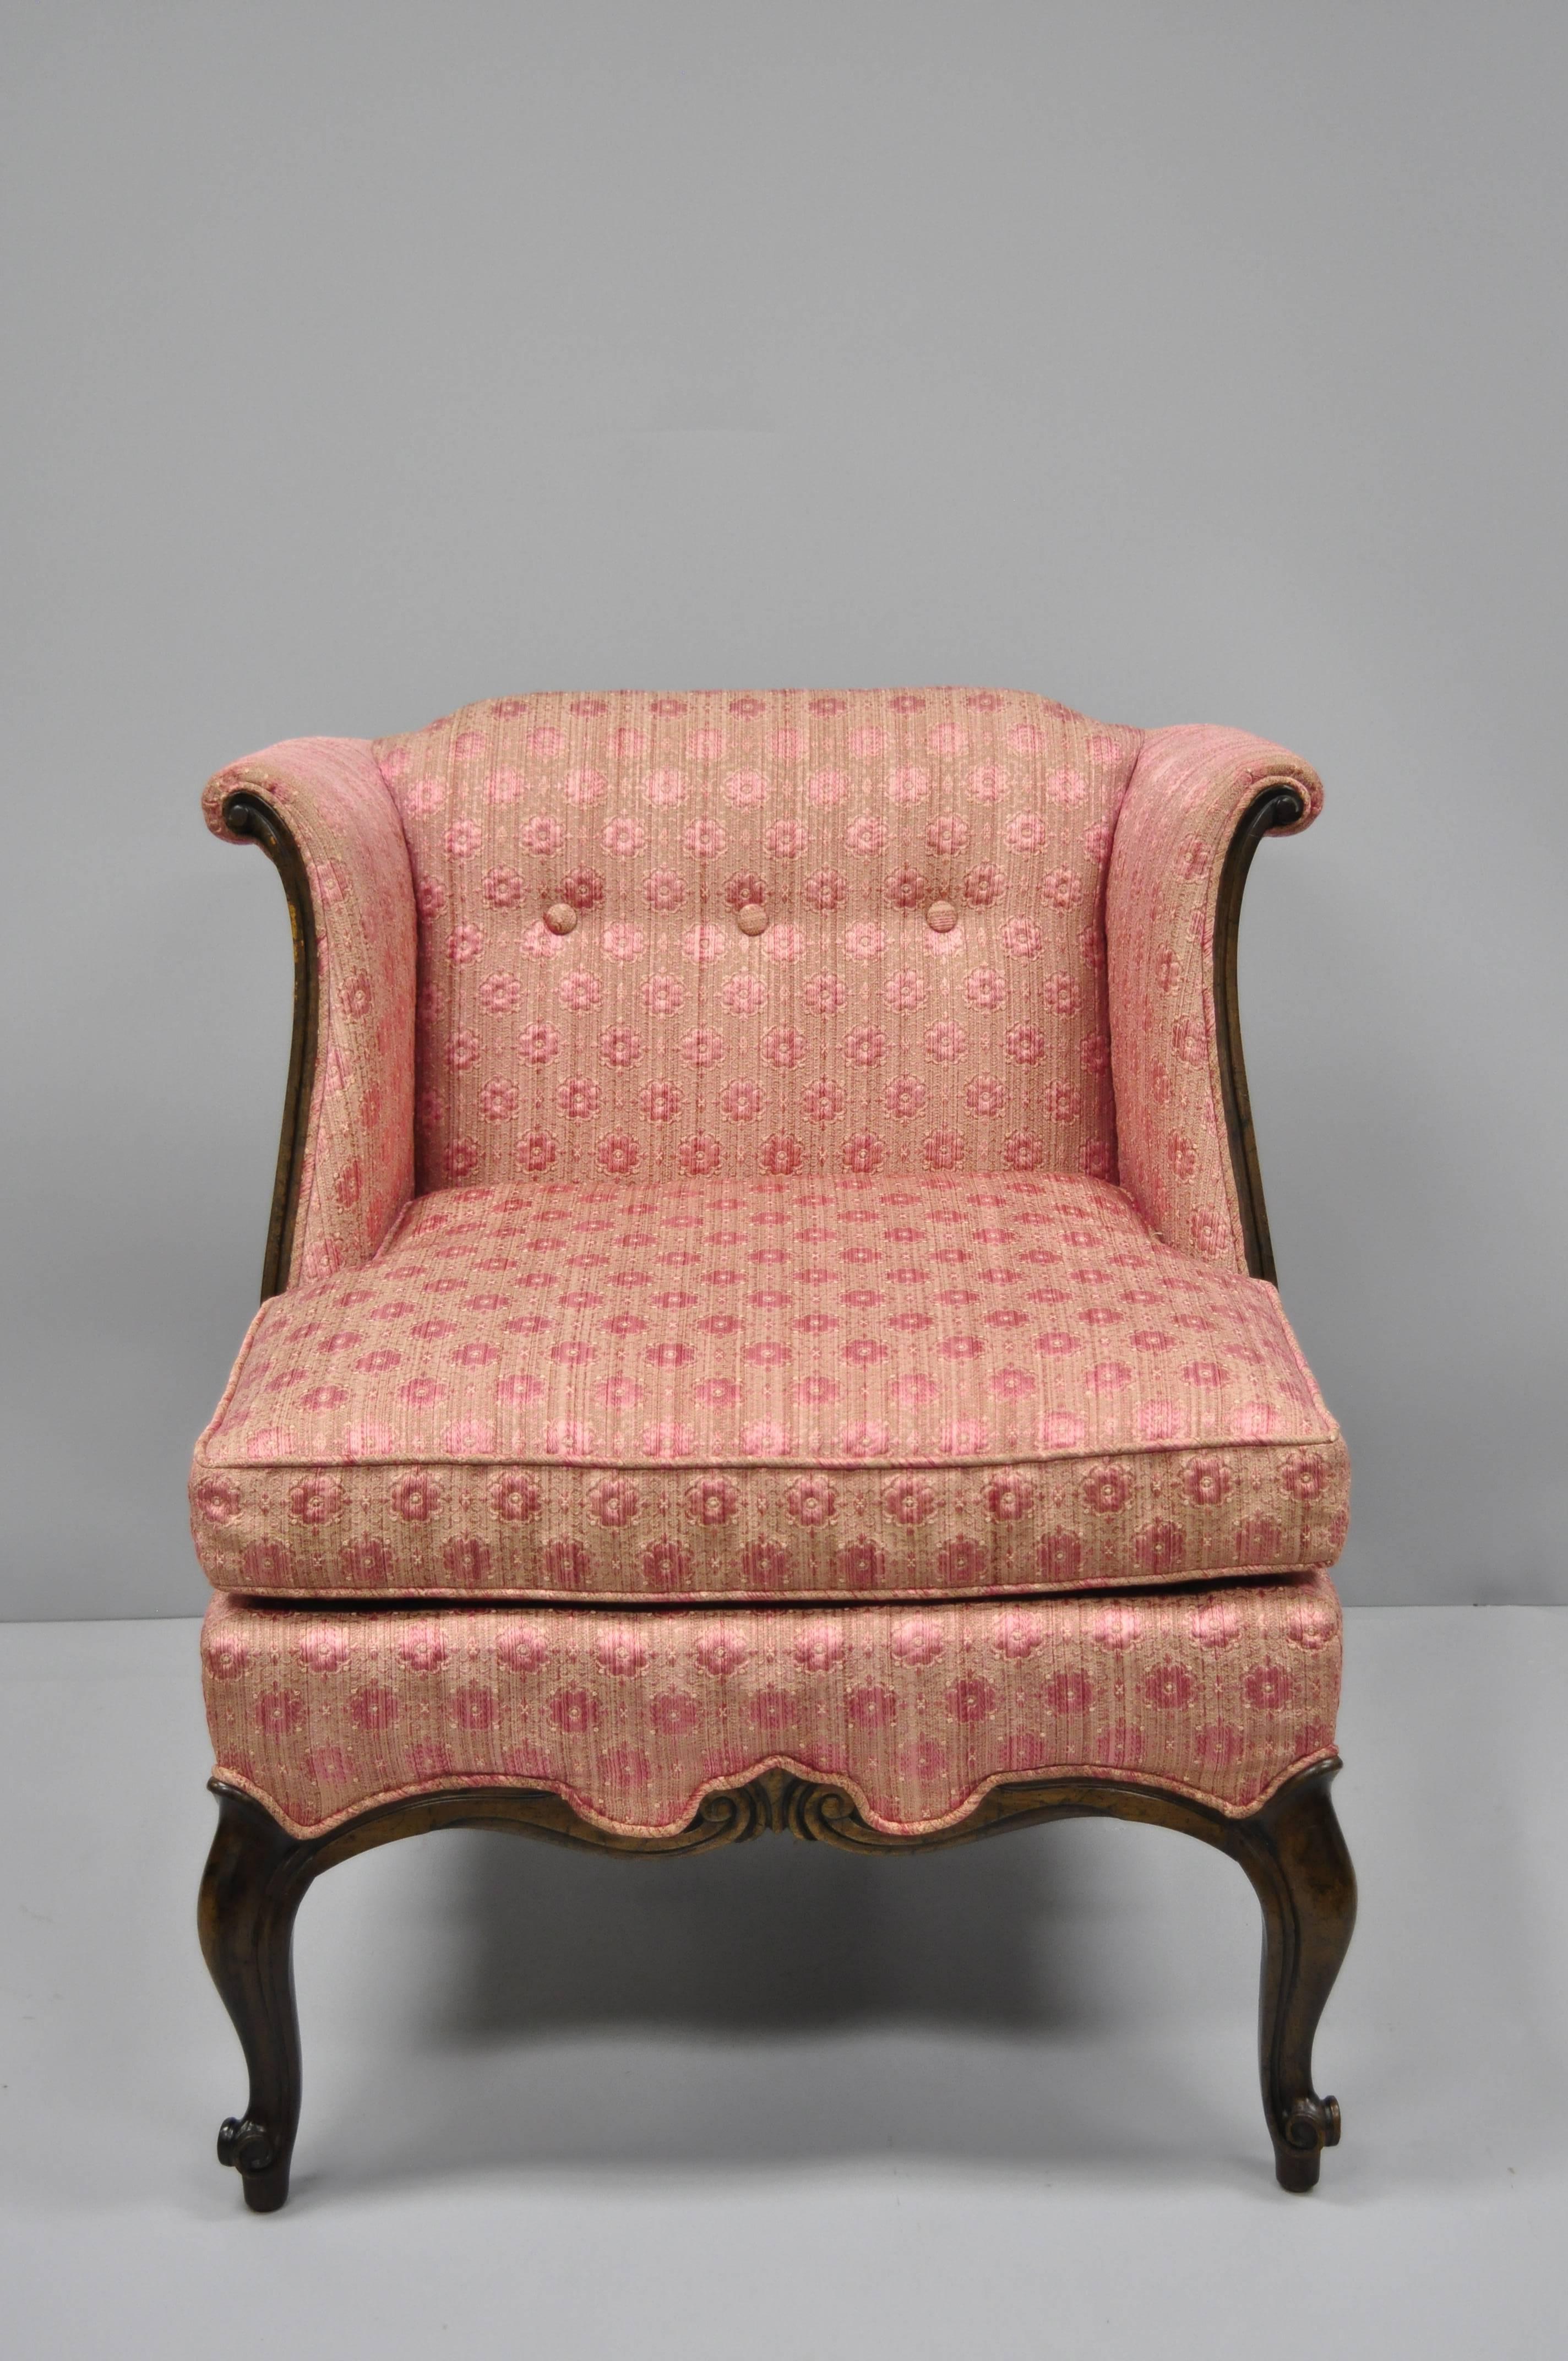 Knapp & Tubbs Kenilworth French Country Louis XV style boudoir accent side chair. Item features a unique wingback frame, solid wood construction, distressed finish, original label, quality American craftsmanship, great style and form, circa mid-20th